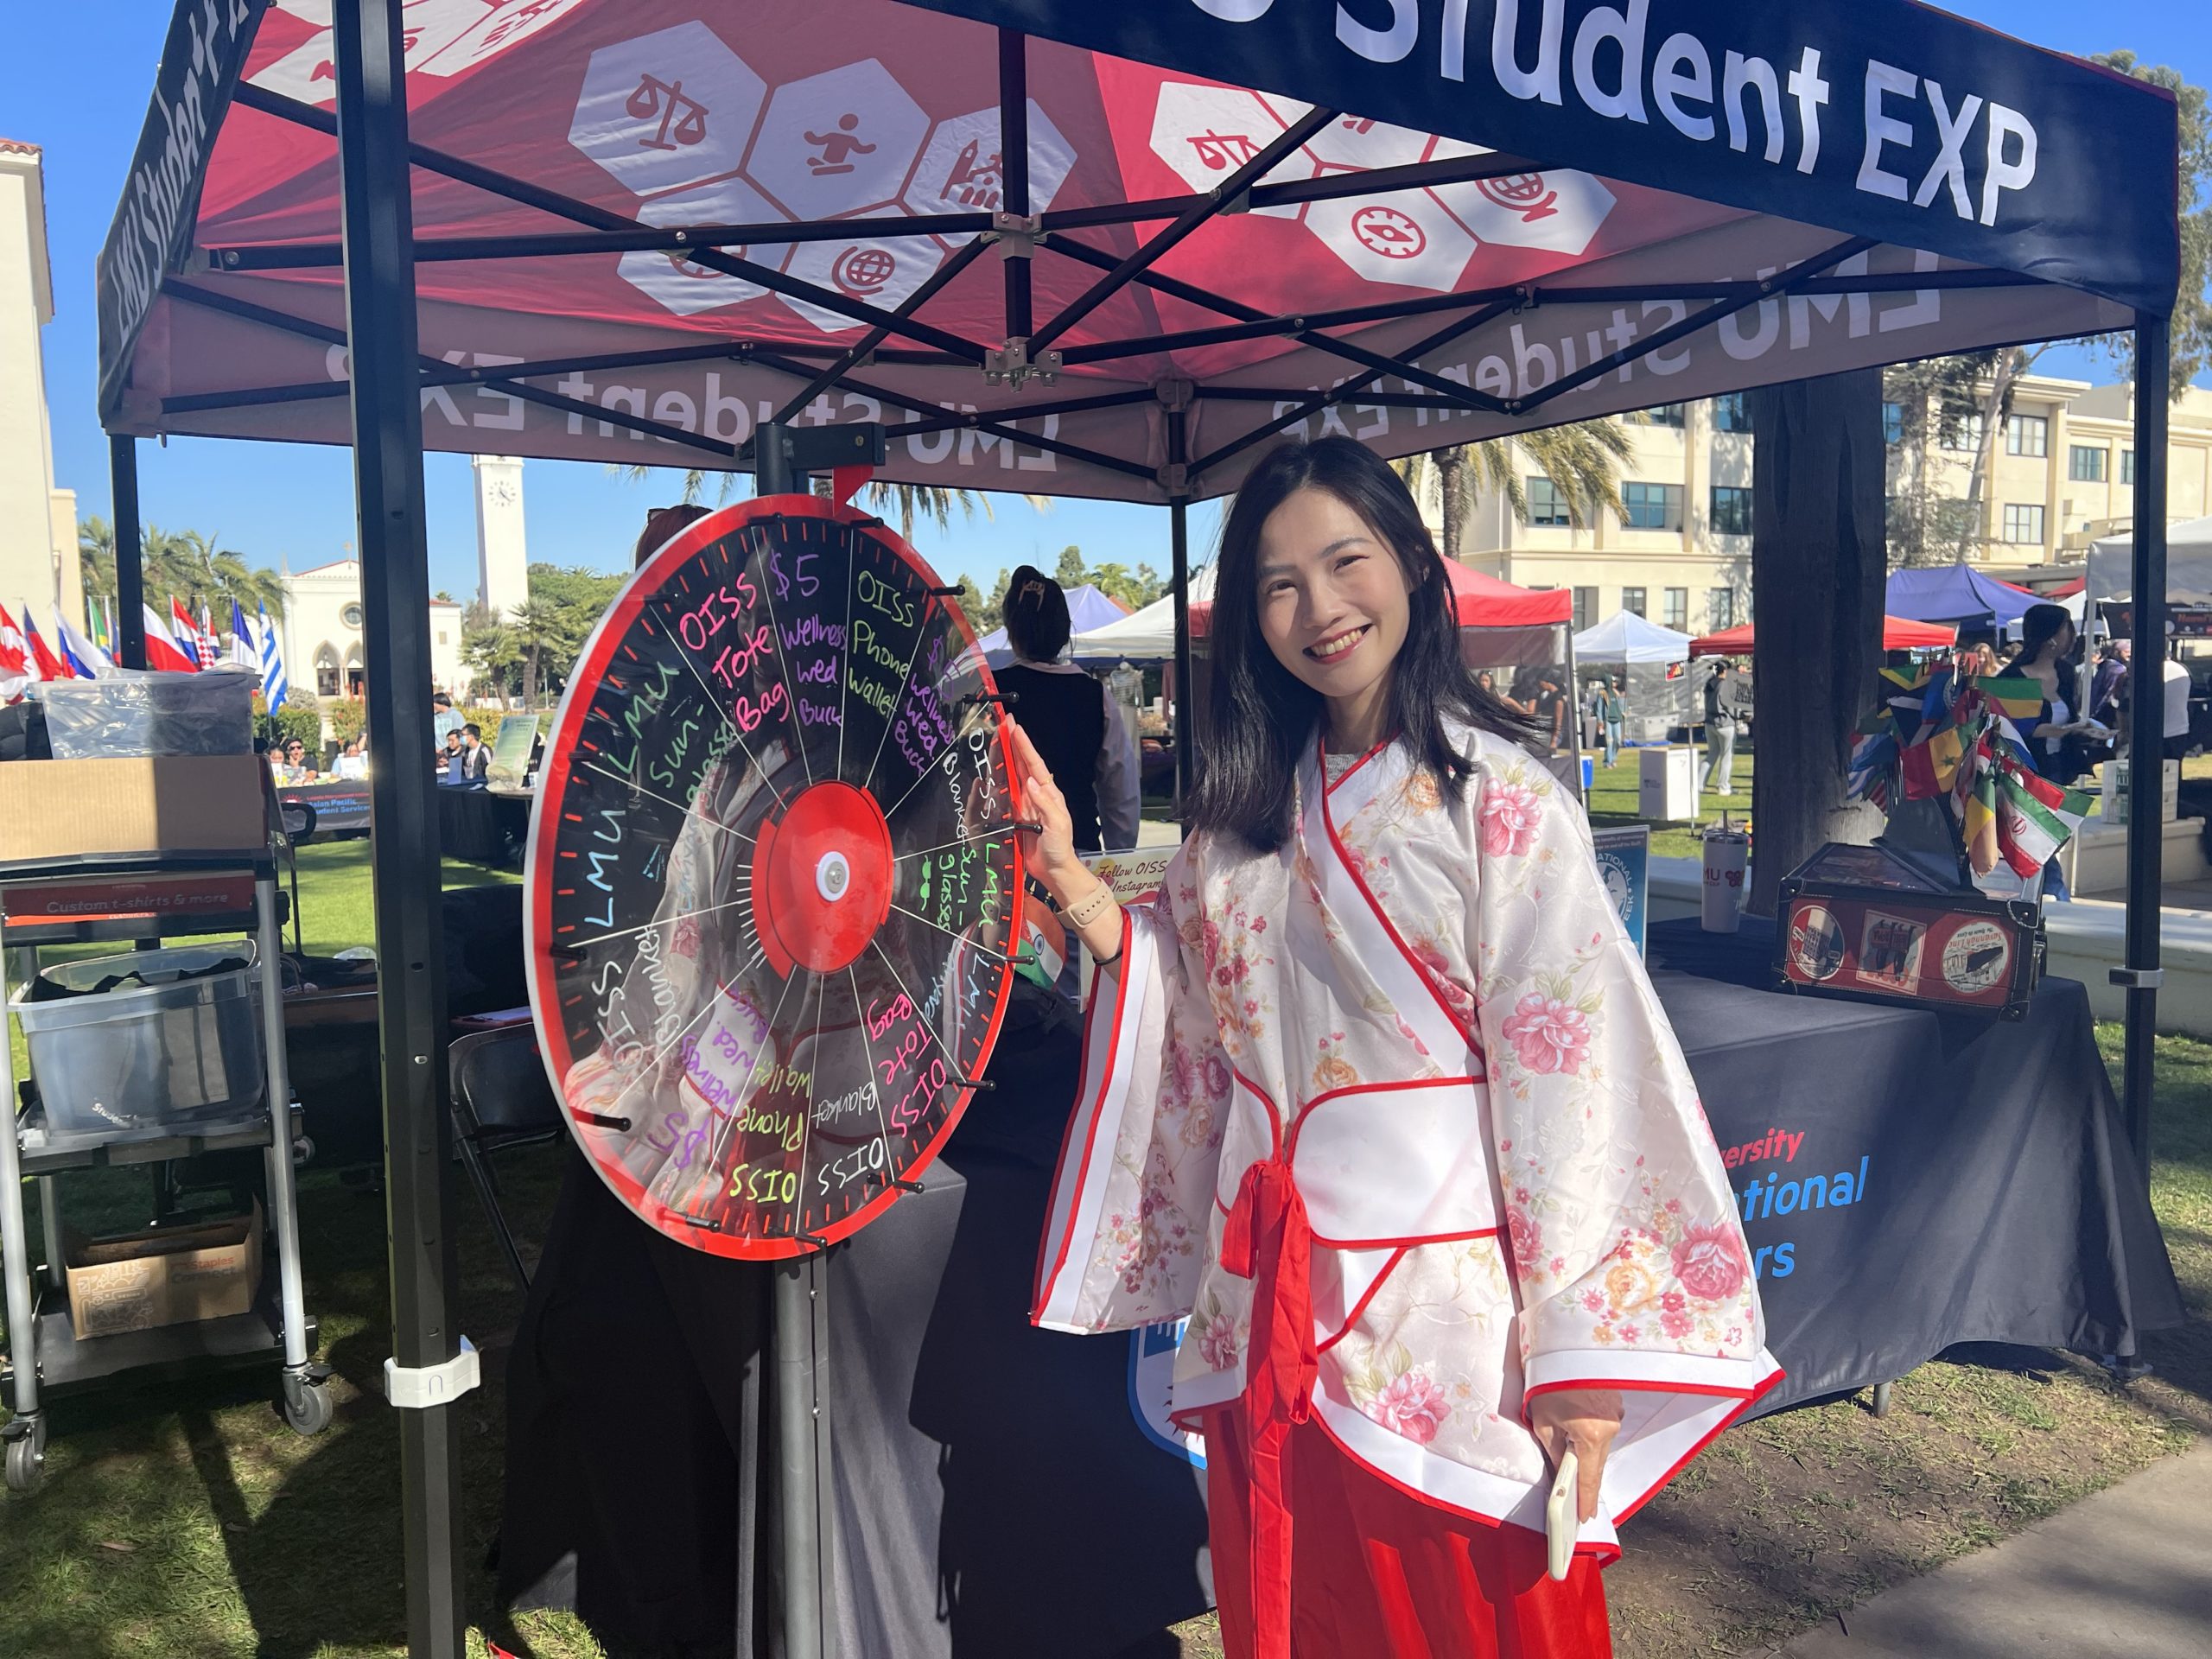 Yi-Hua Shih stands in a traditional outfit outside during the International Education Fair.